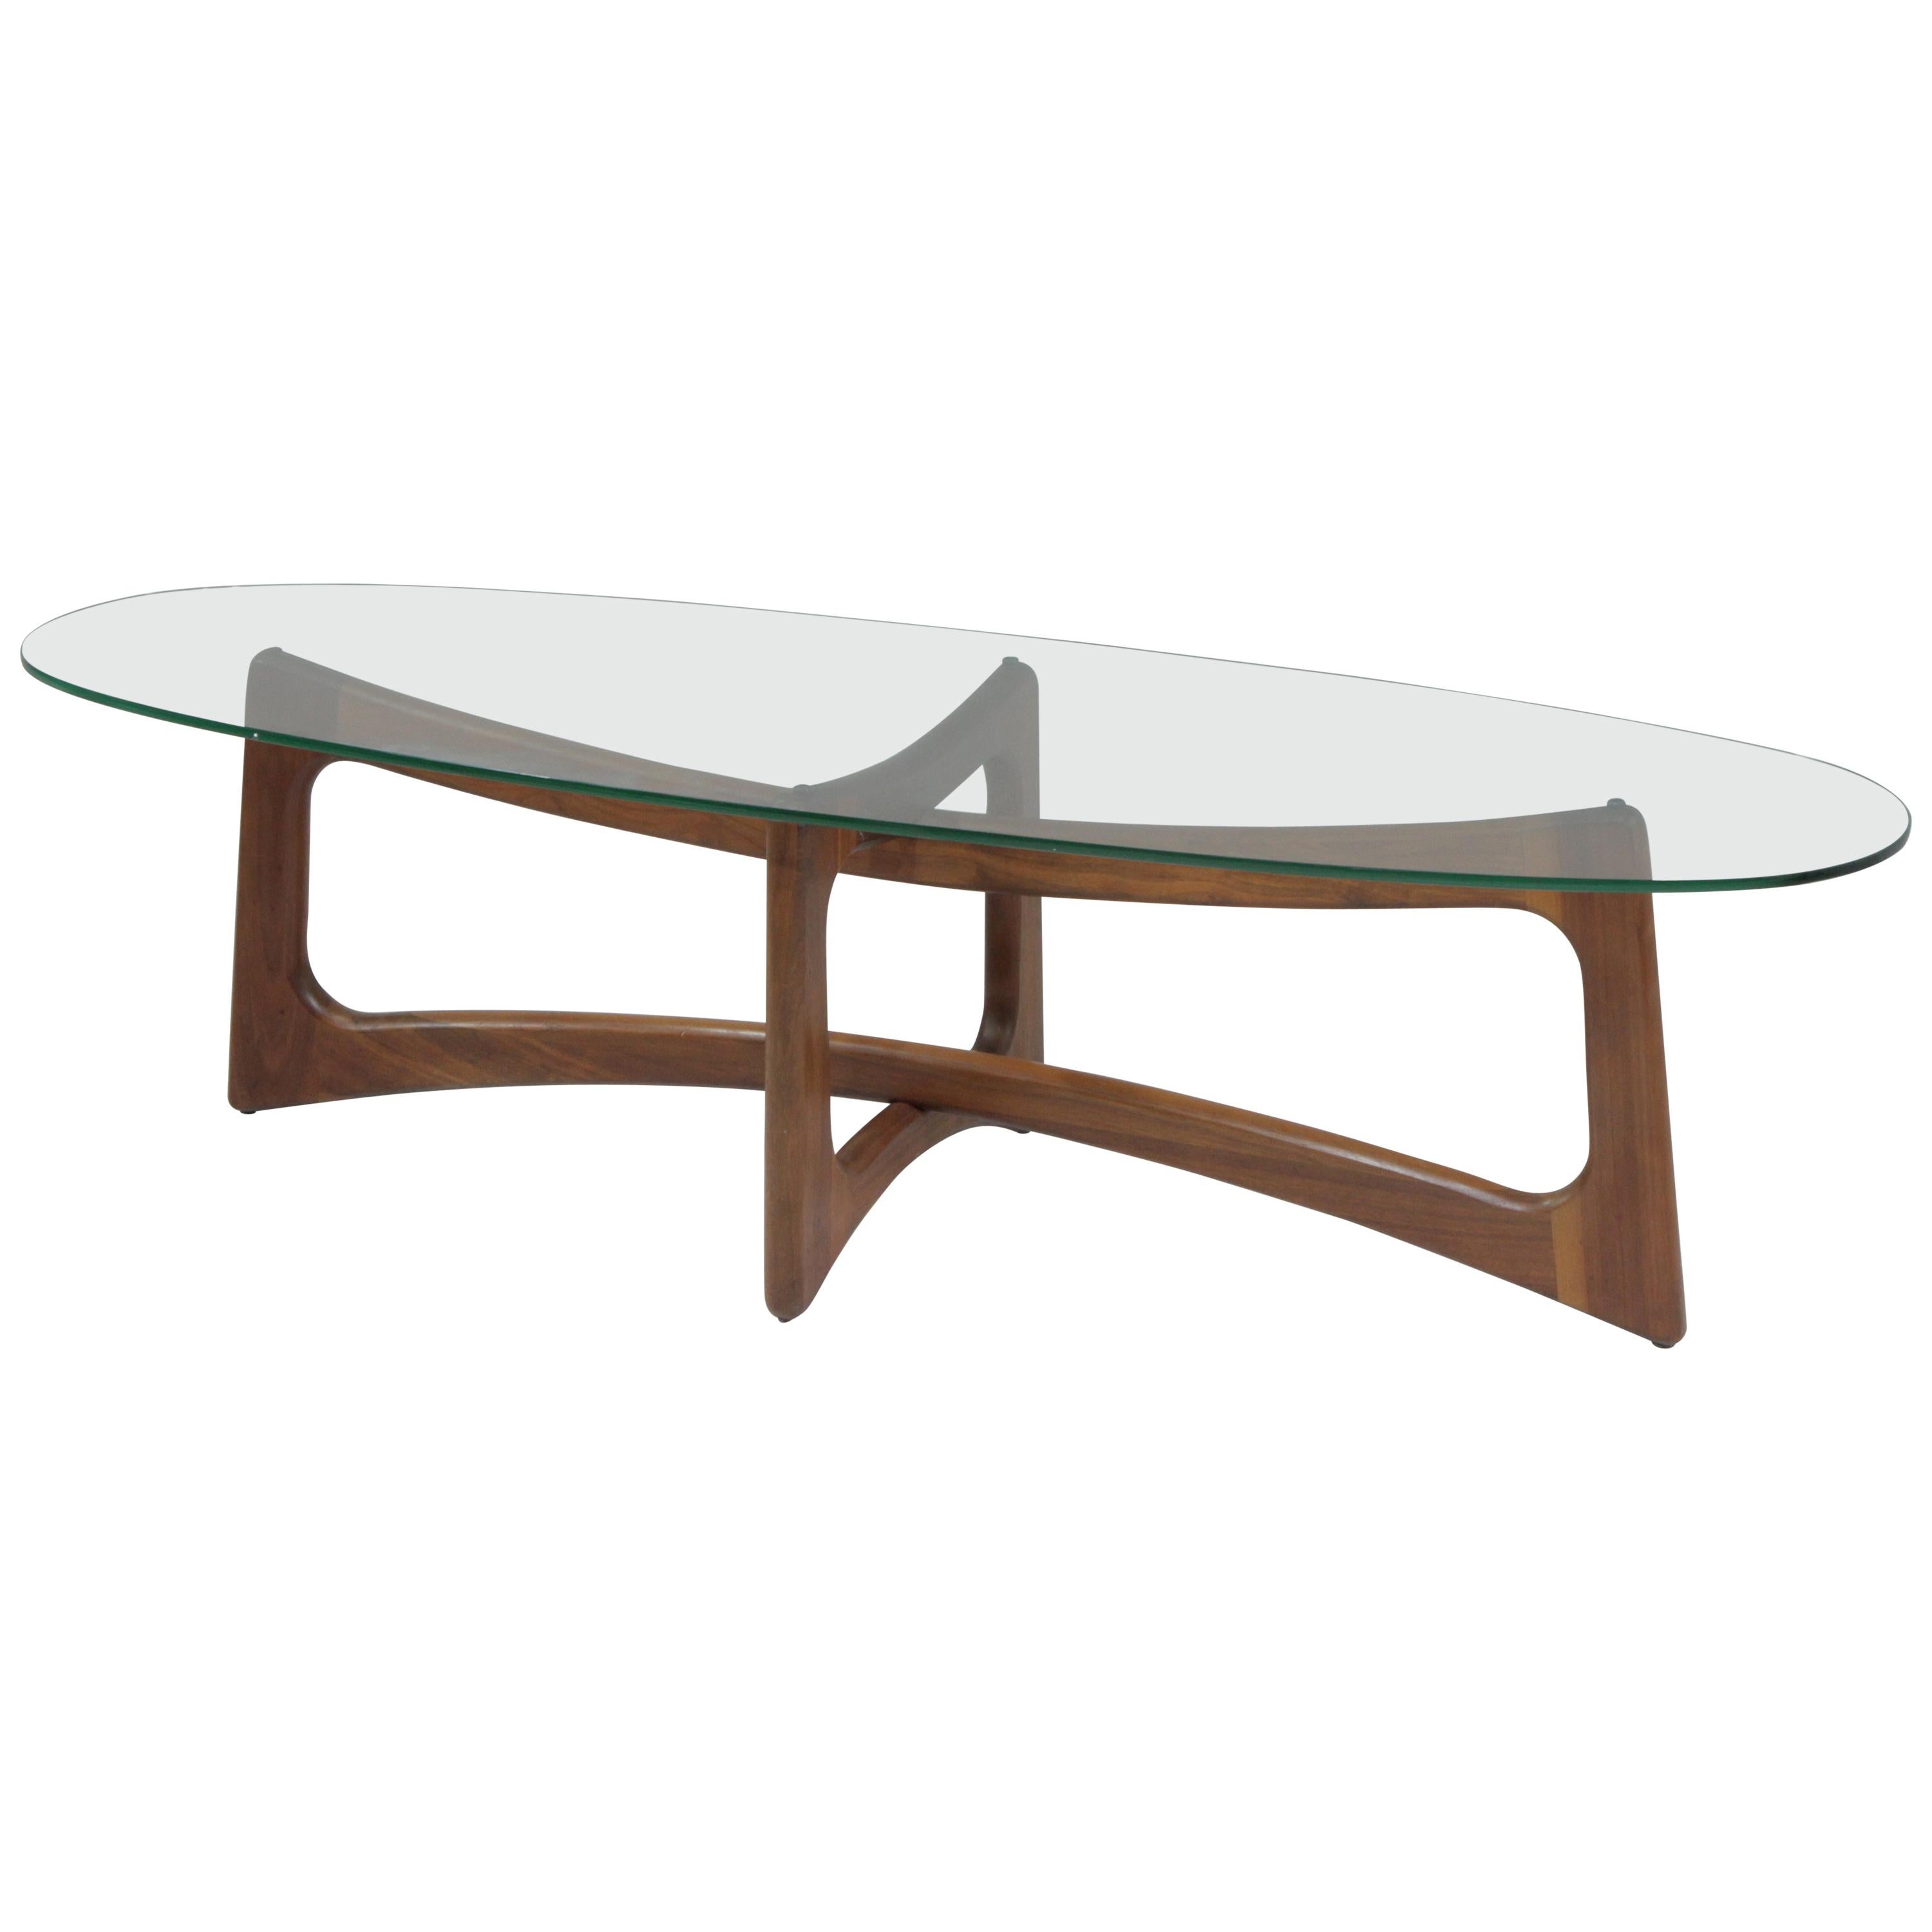 1960s Mid-Century Modern Adrian Pearsall for Craft Associates Coffee Table